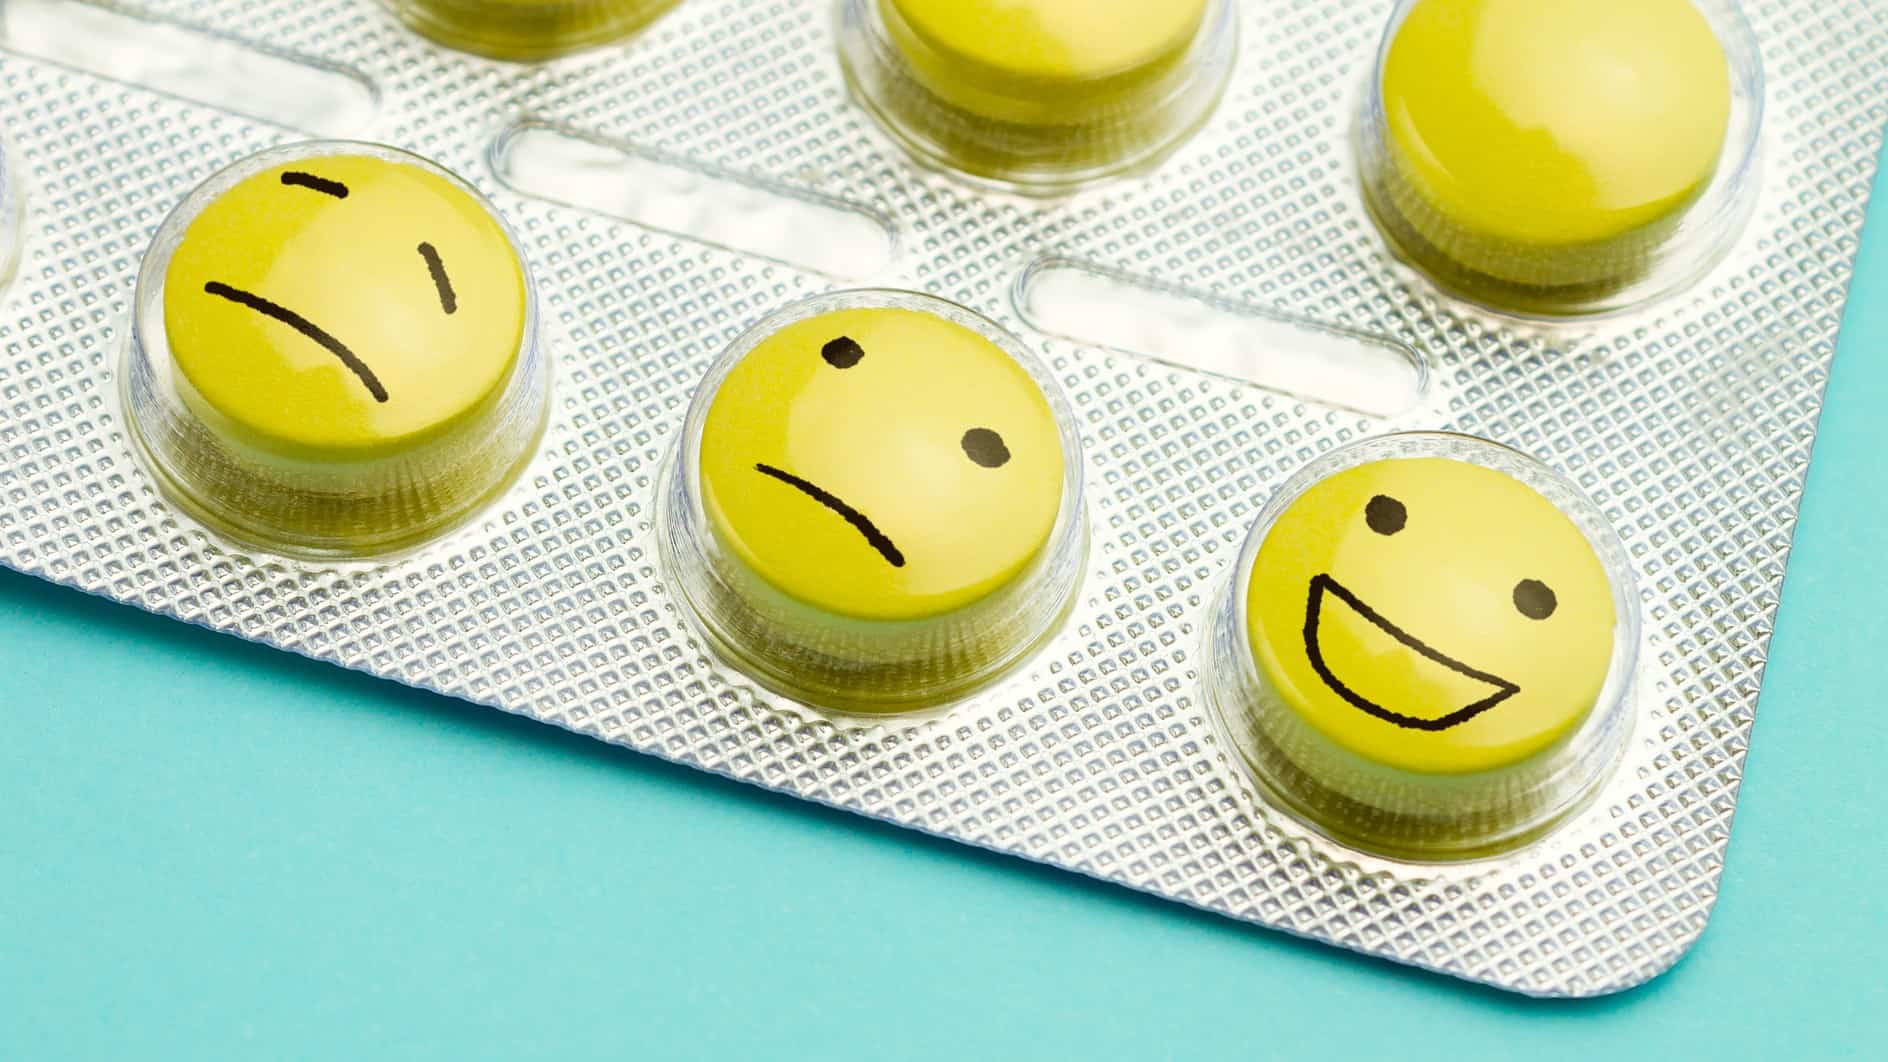 Three pills with faces showing sad to happy, indicating a rising share price for an ASX pharmaceutical company